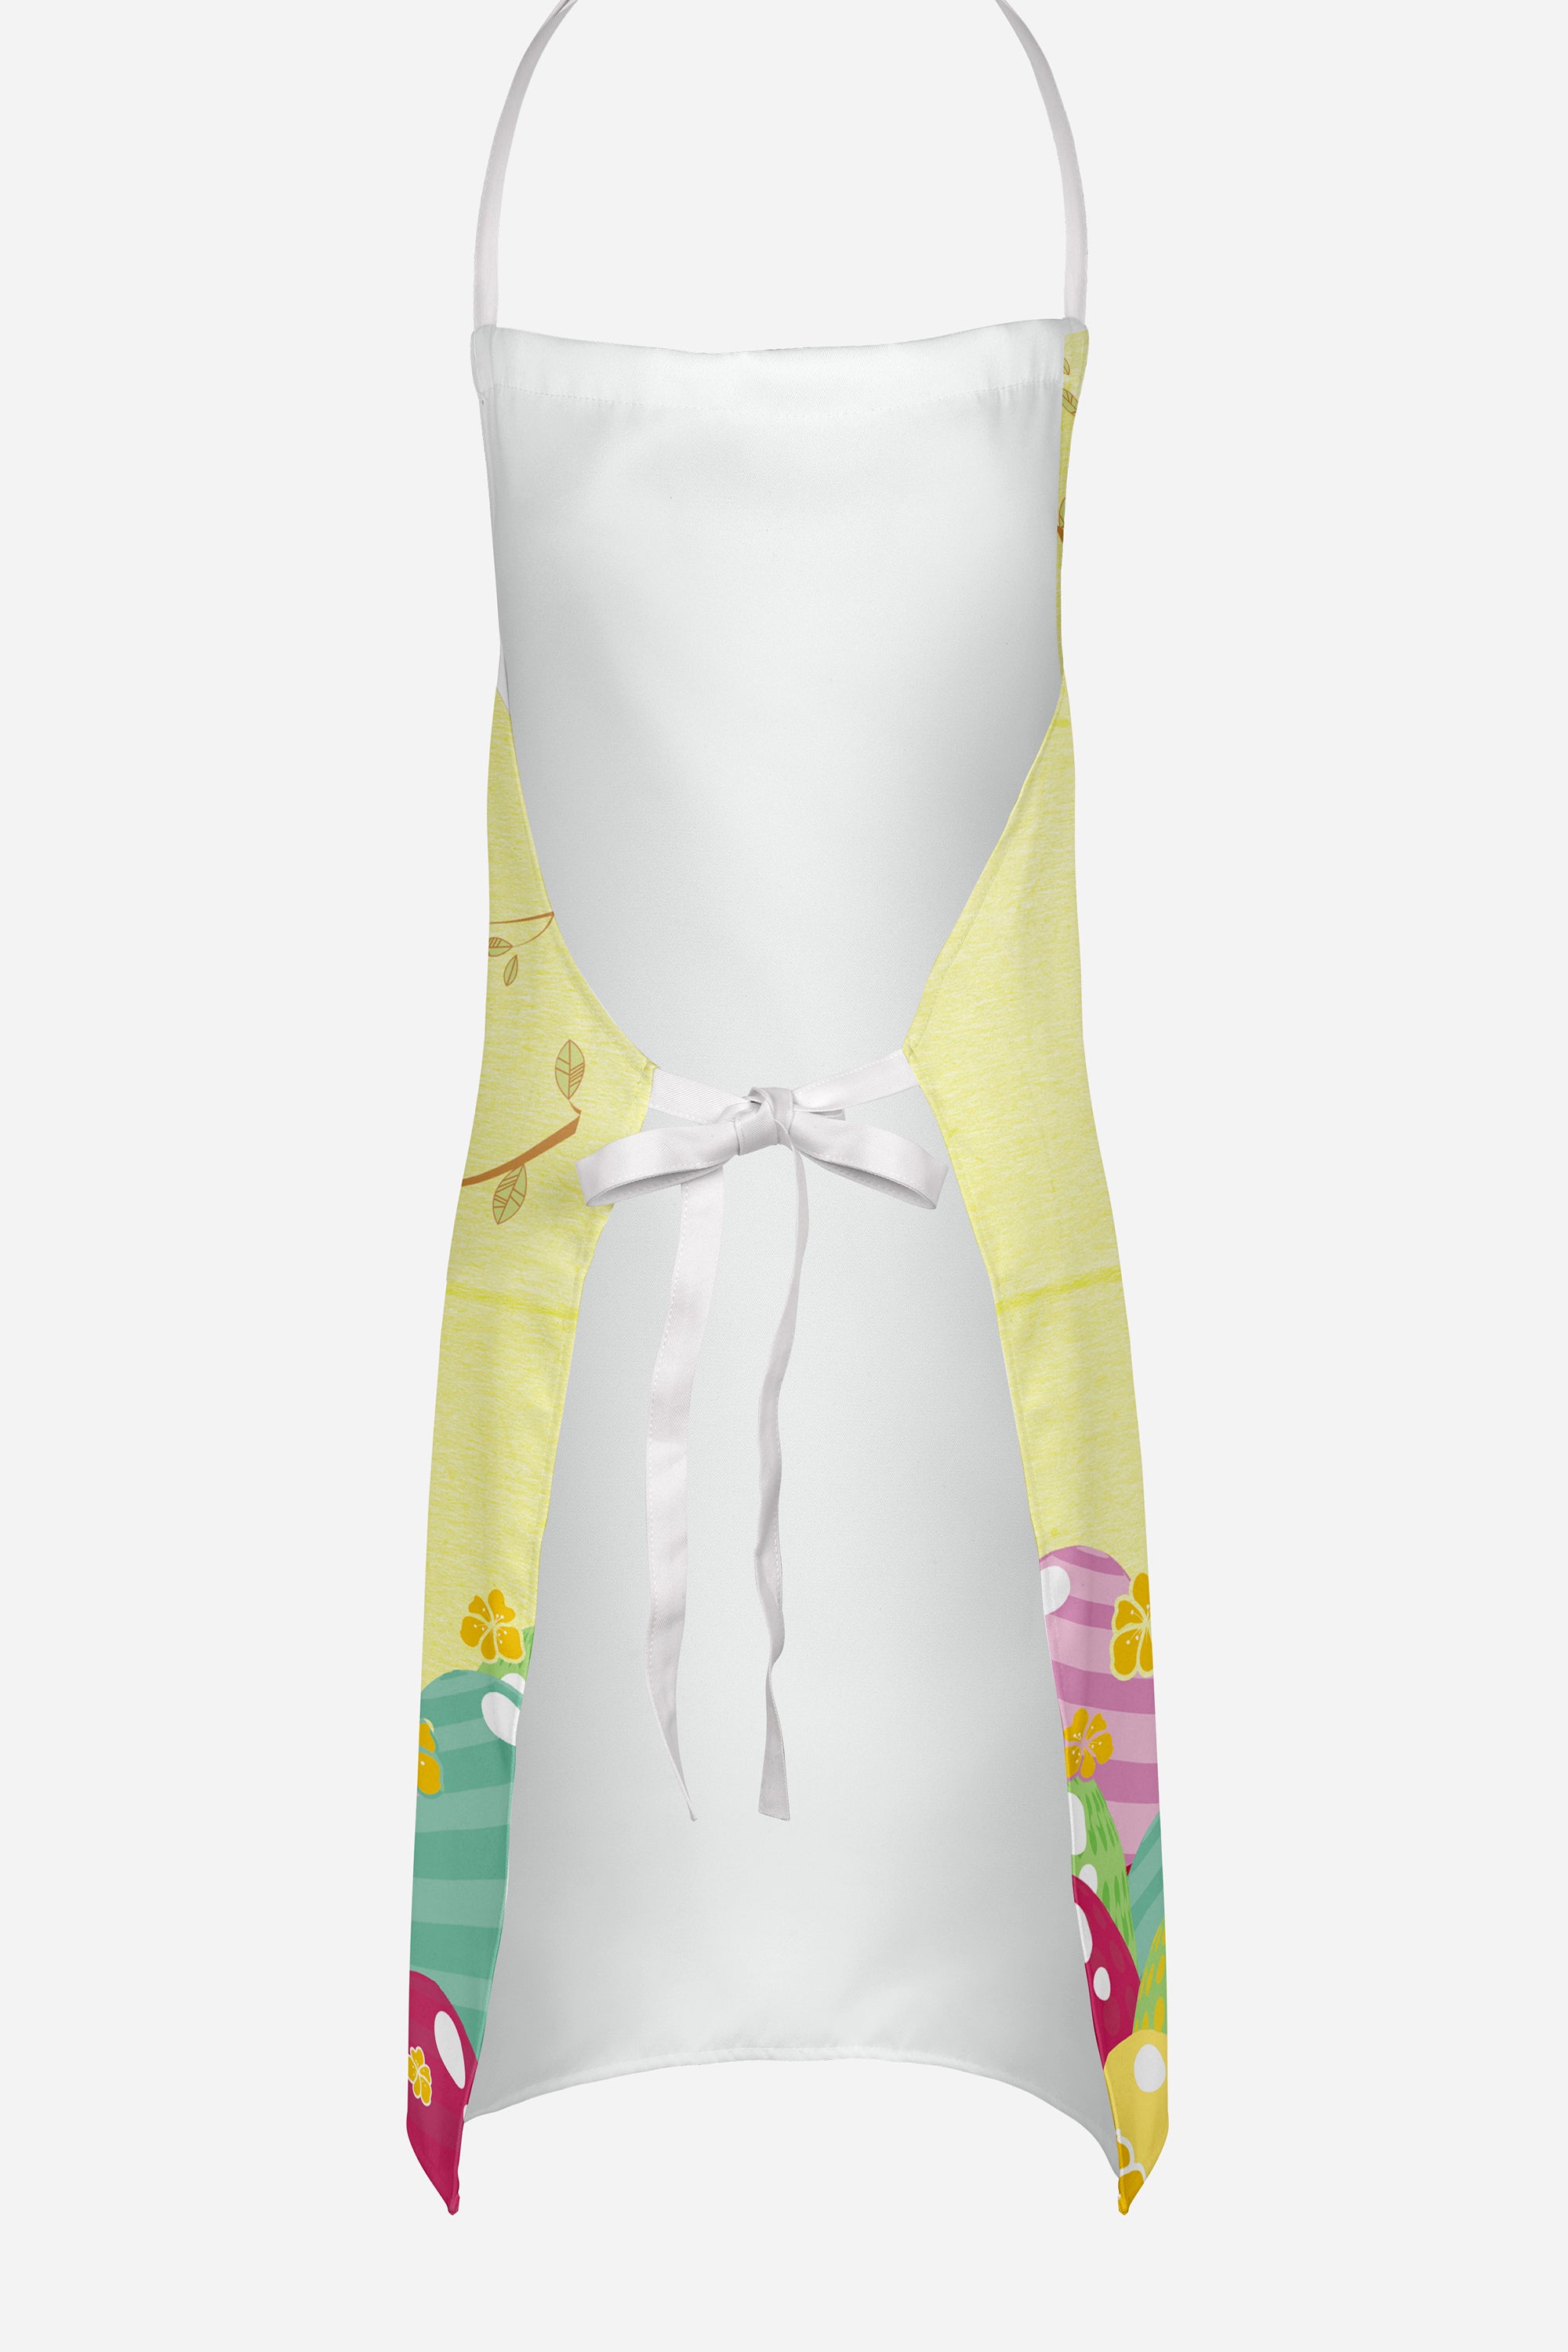 Easter Eggs Fawn Boxer Apron BB6115APRON  the-store.com.